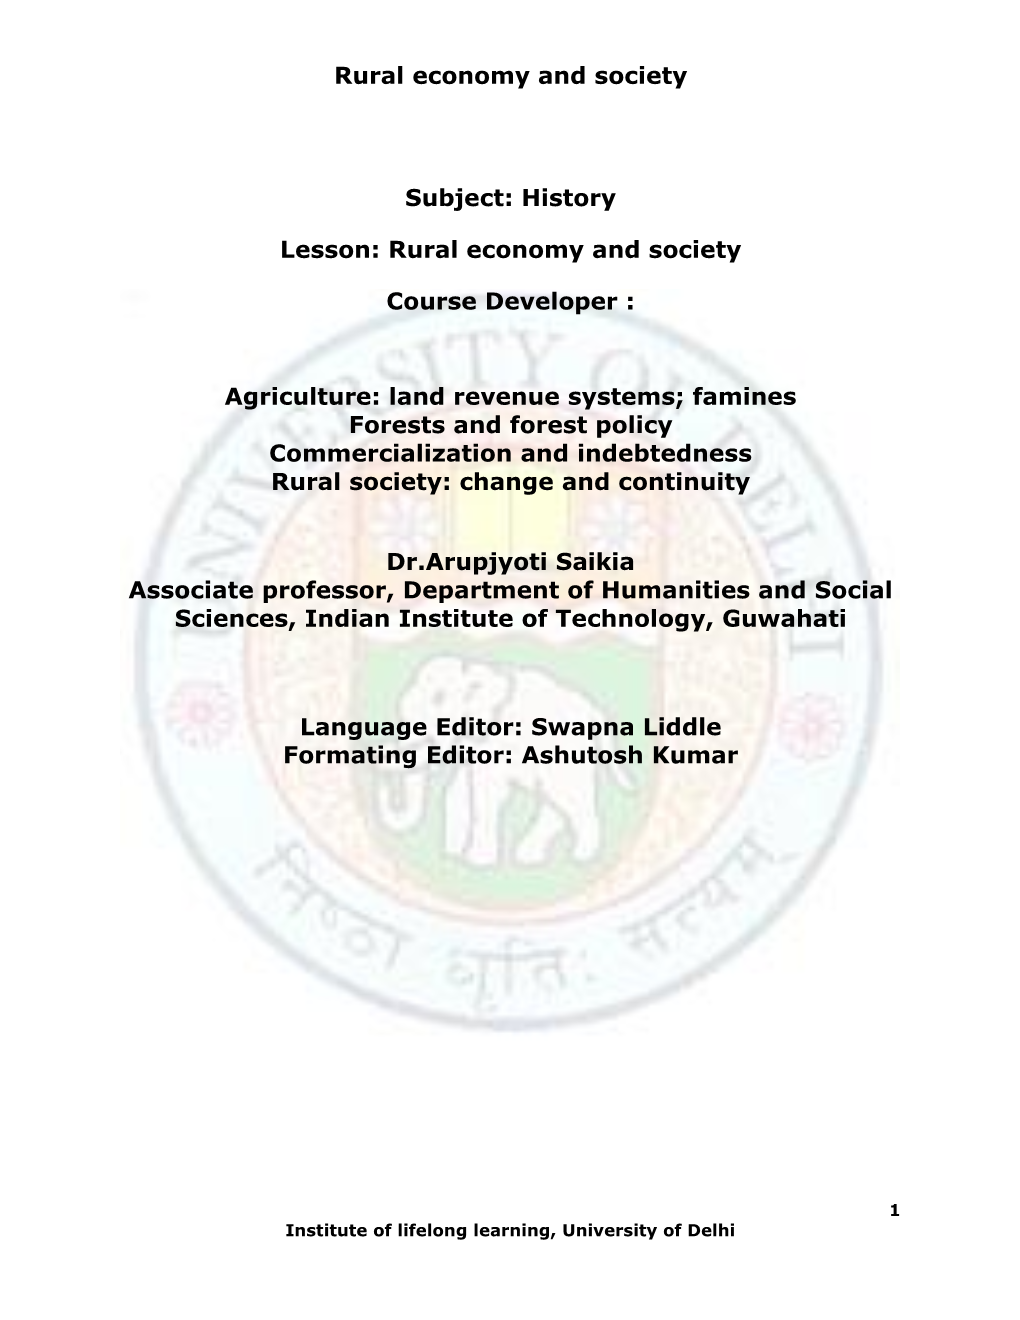 Rural Economy and Society Course Developer : Agriculture